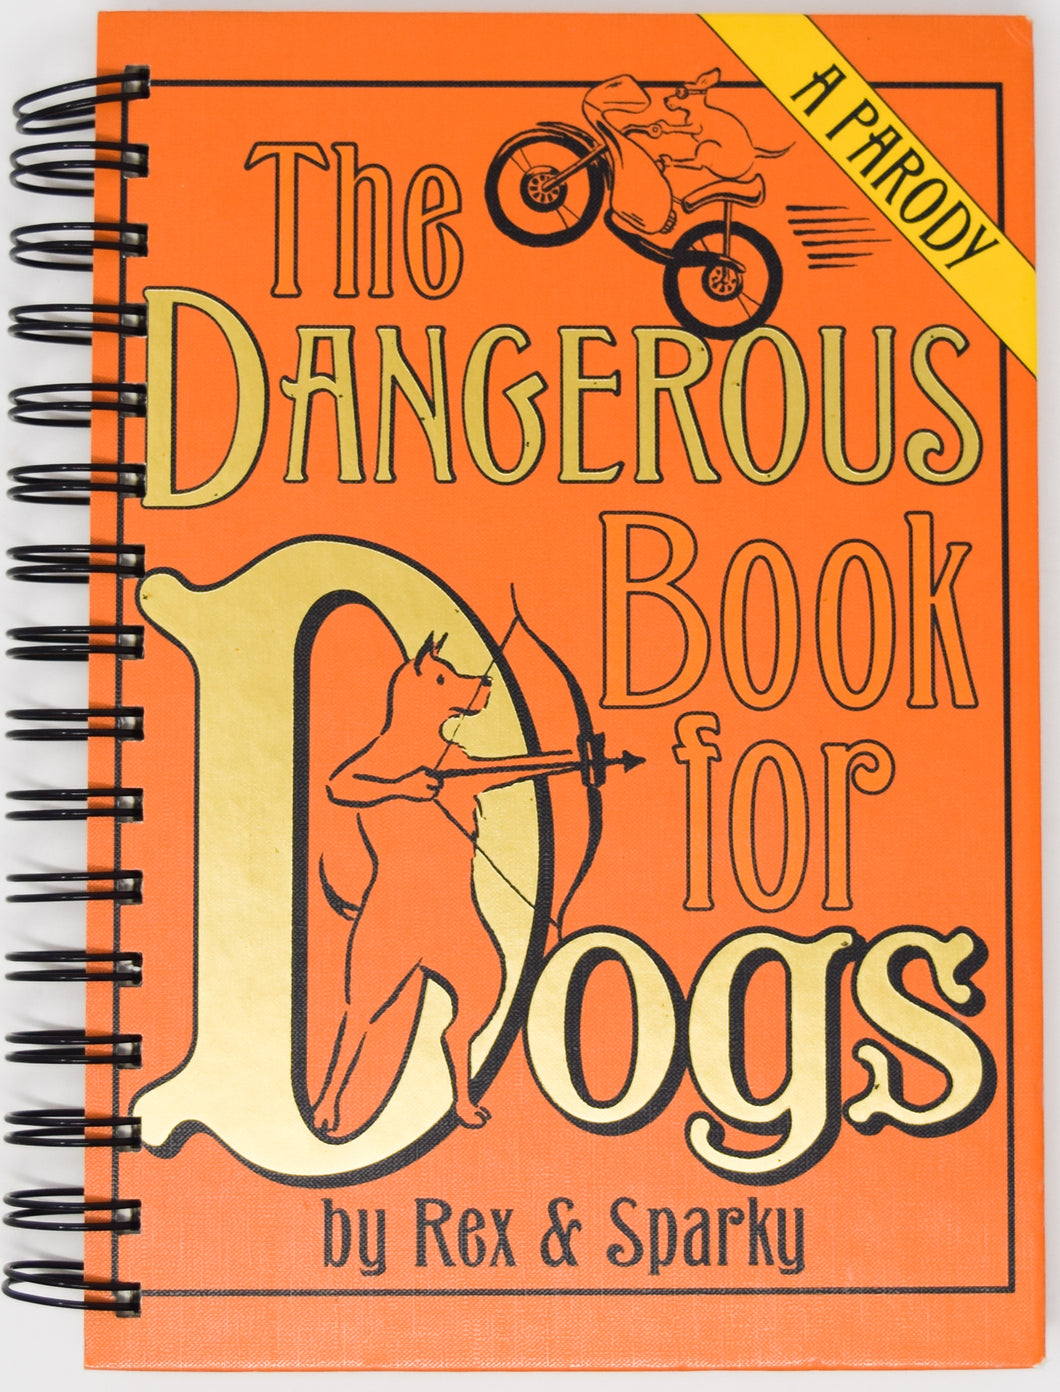 Dangerous Book for Dogs